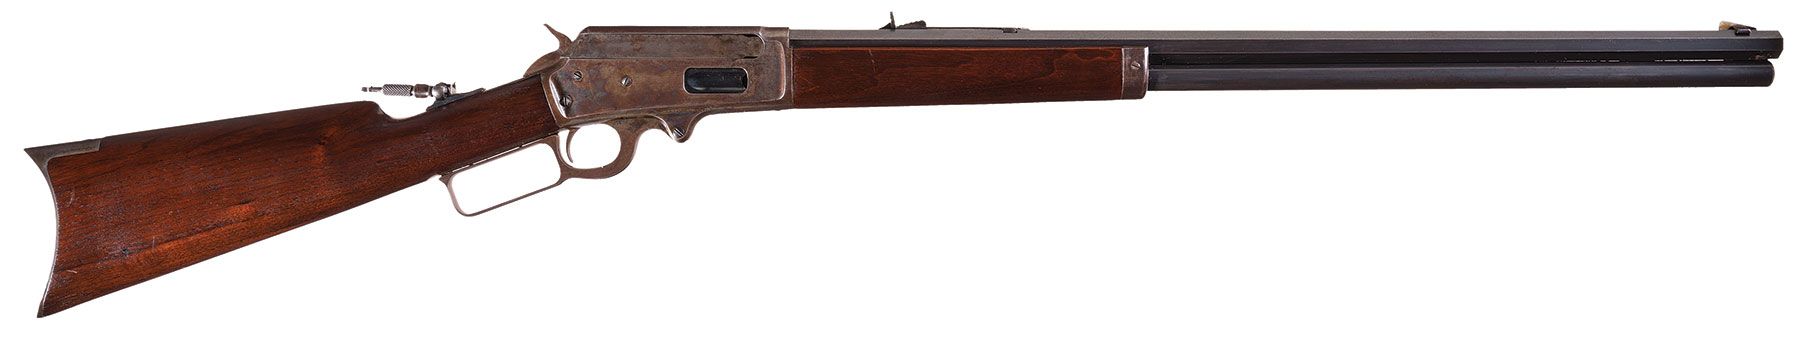 Desirable Antique Marlin Model 1895 Lever Action .45-70 Rifle